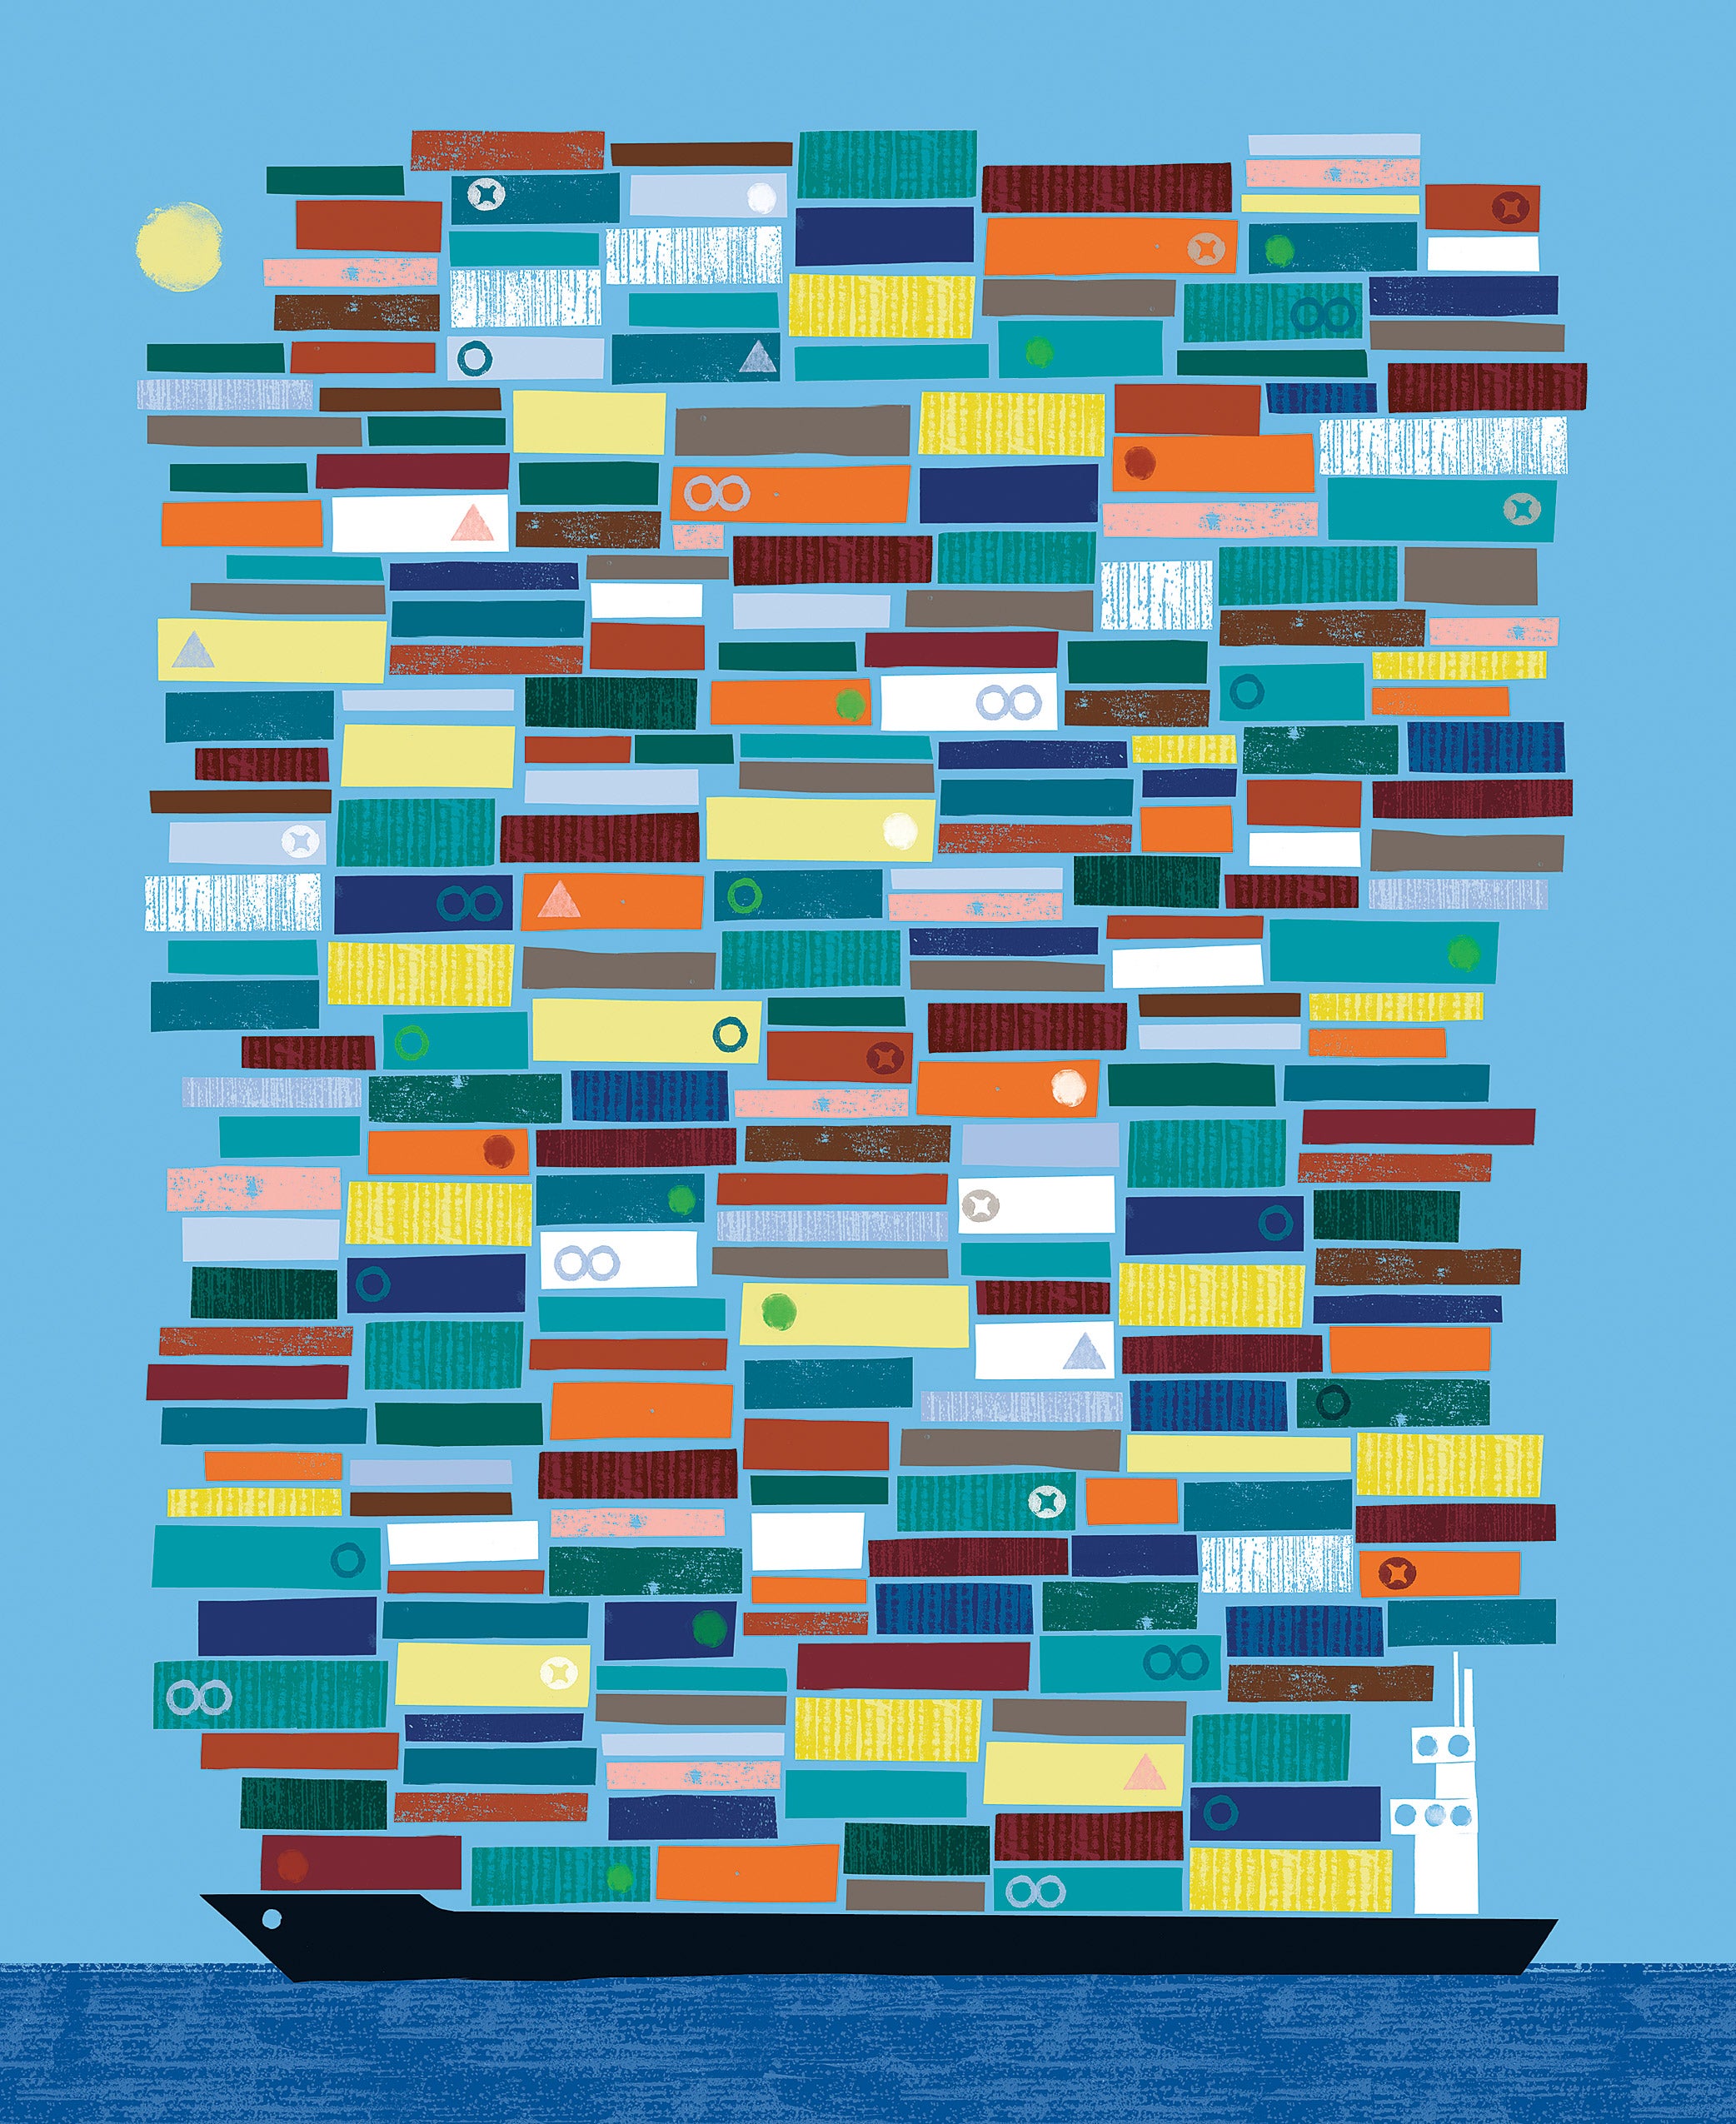 Illustration of stacked containers on a ship